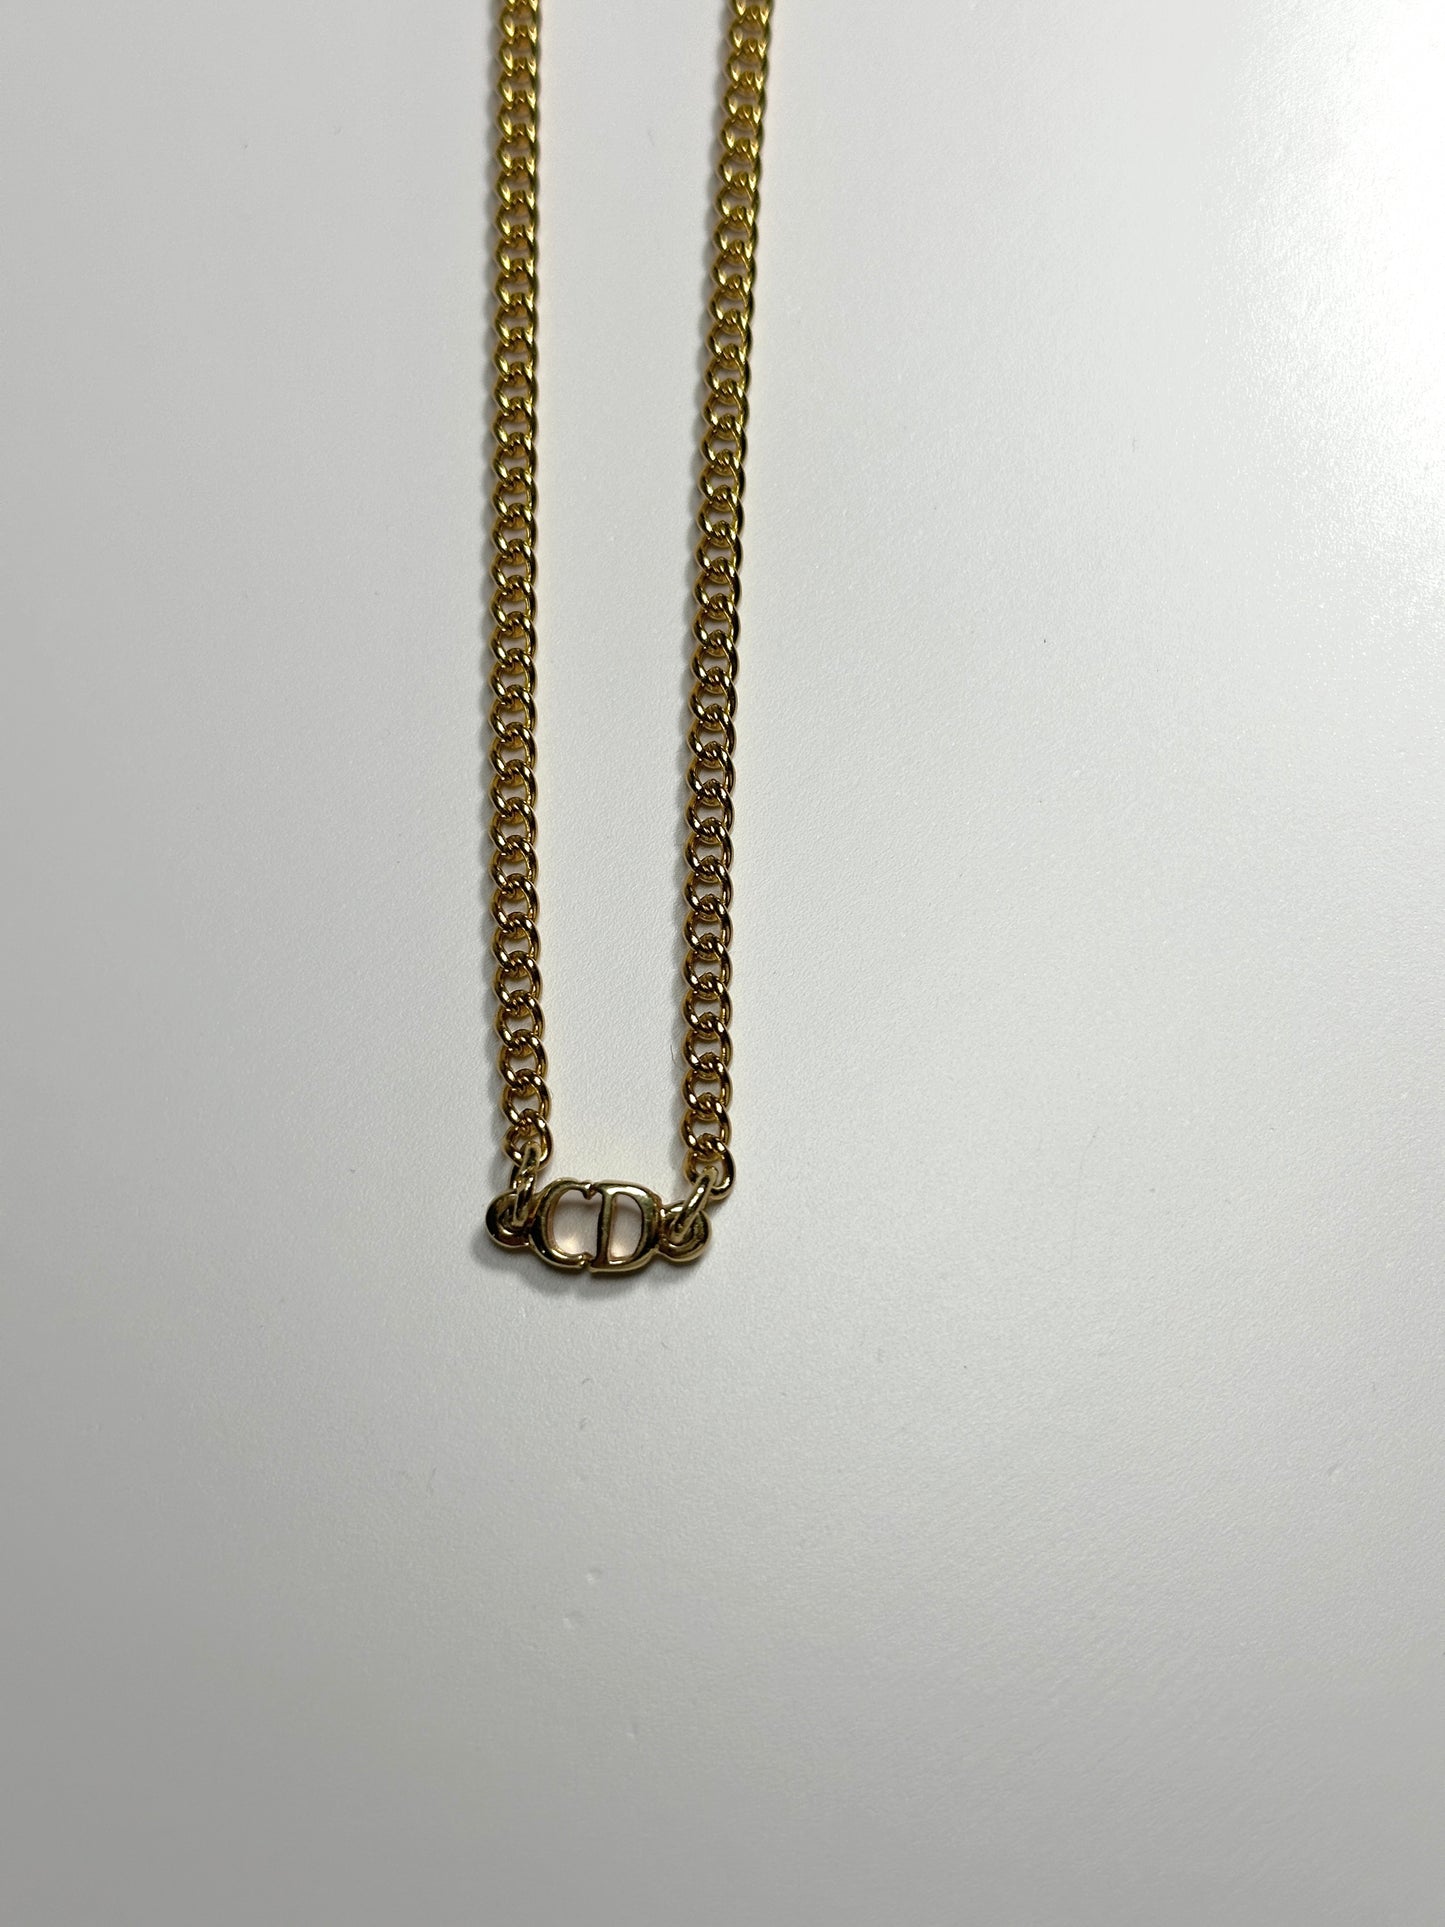 Authentic Dior 'CD' Pendant | Reworked Gold 14-16" Necklace